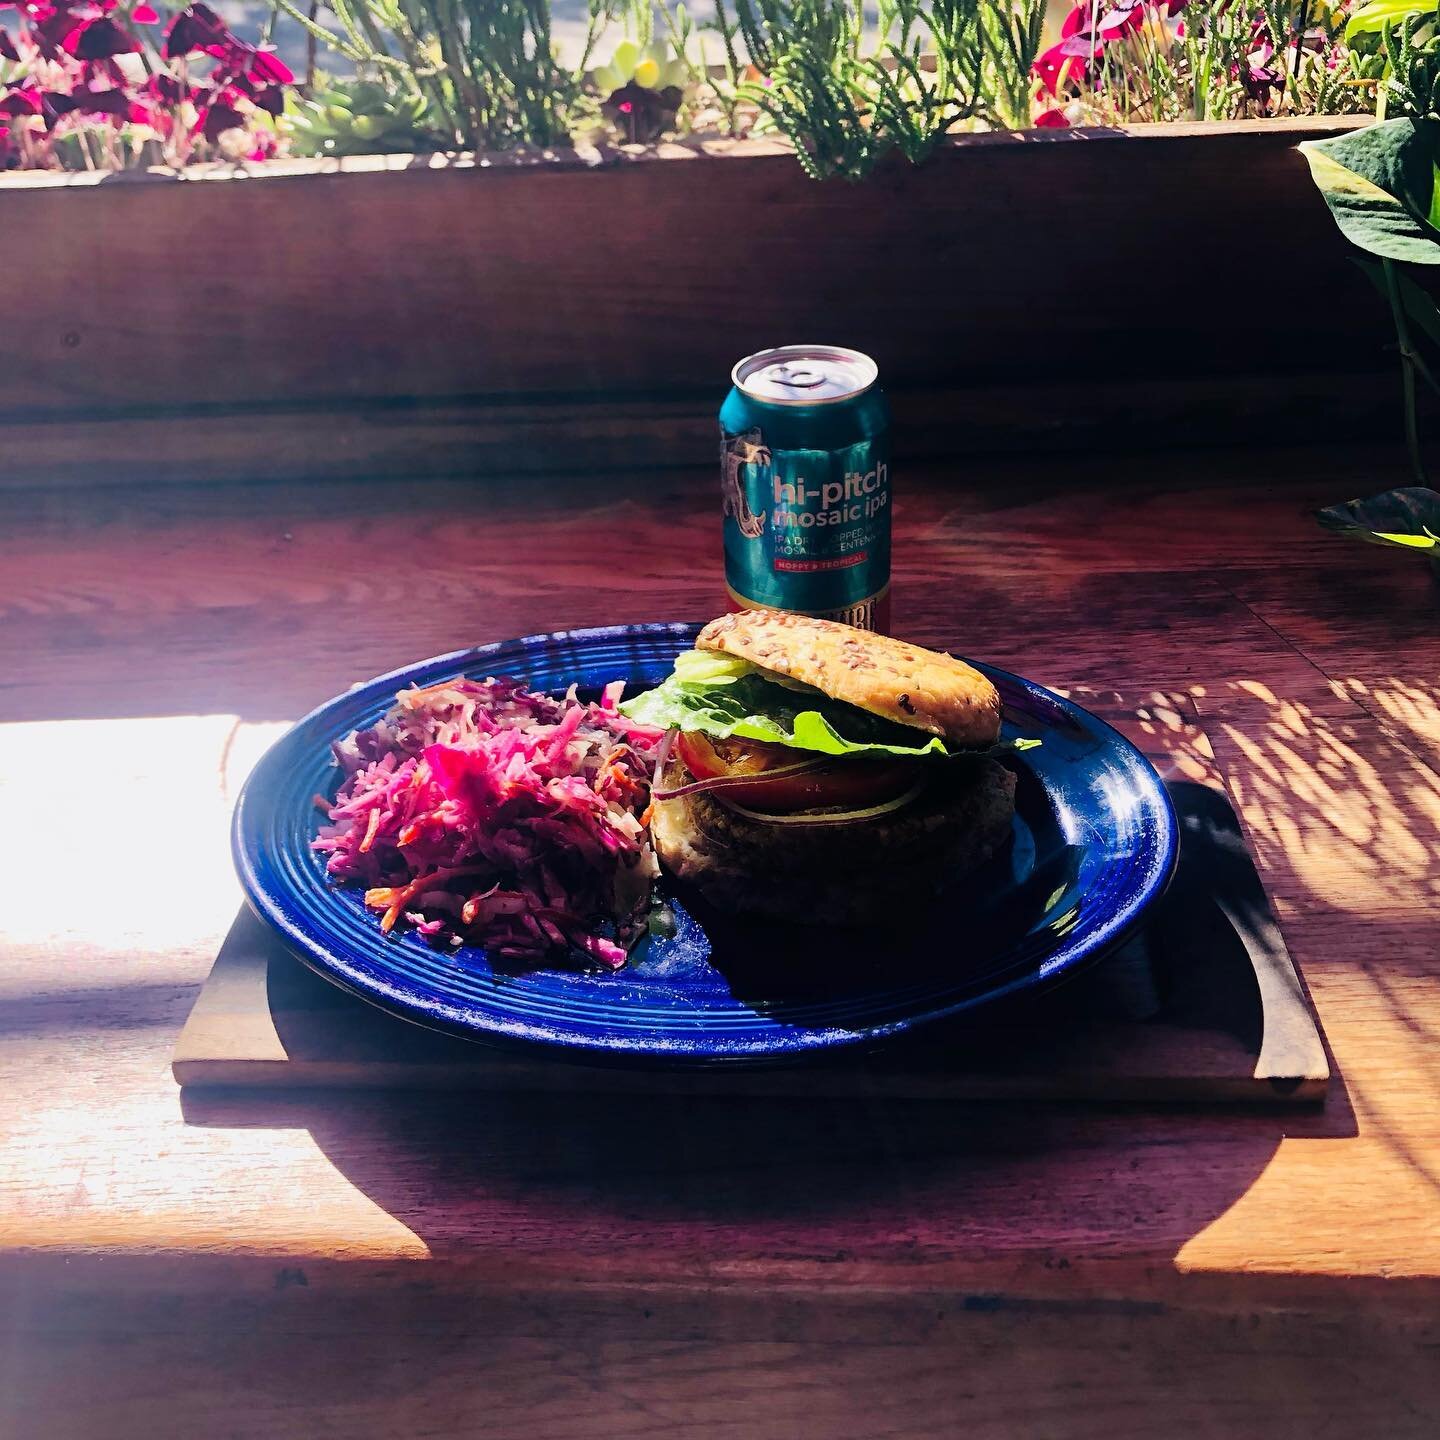 Don&rsquo;t miss out on our Wednesday special! $12.00 for our hand-pattied veggie burger &amp; a can of beer or kombucha, to-go! #ashevillefood #828isgreat #vegeterianburger